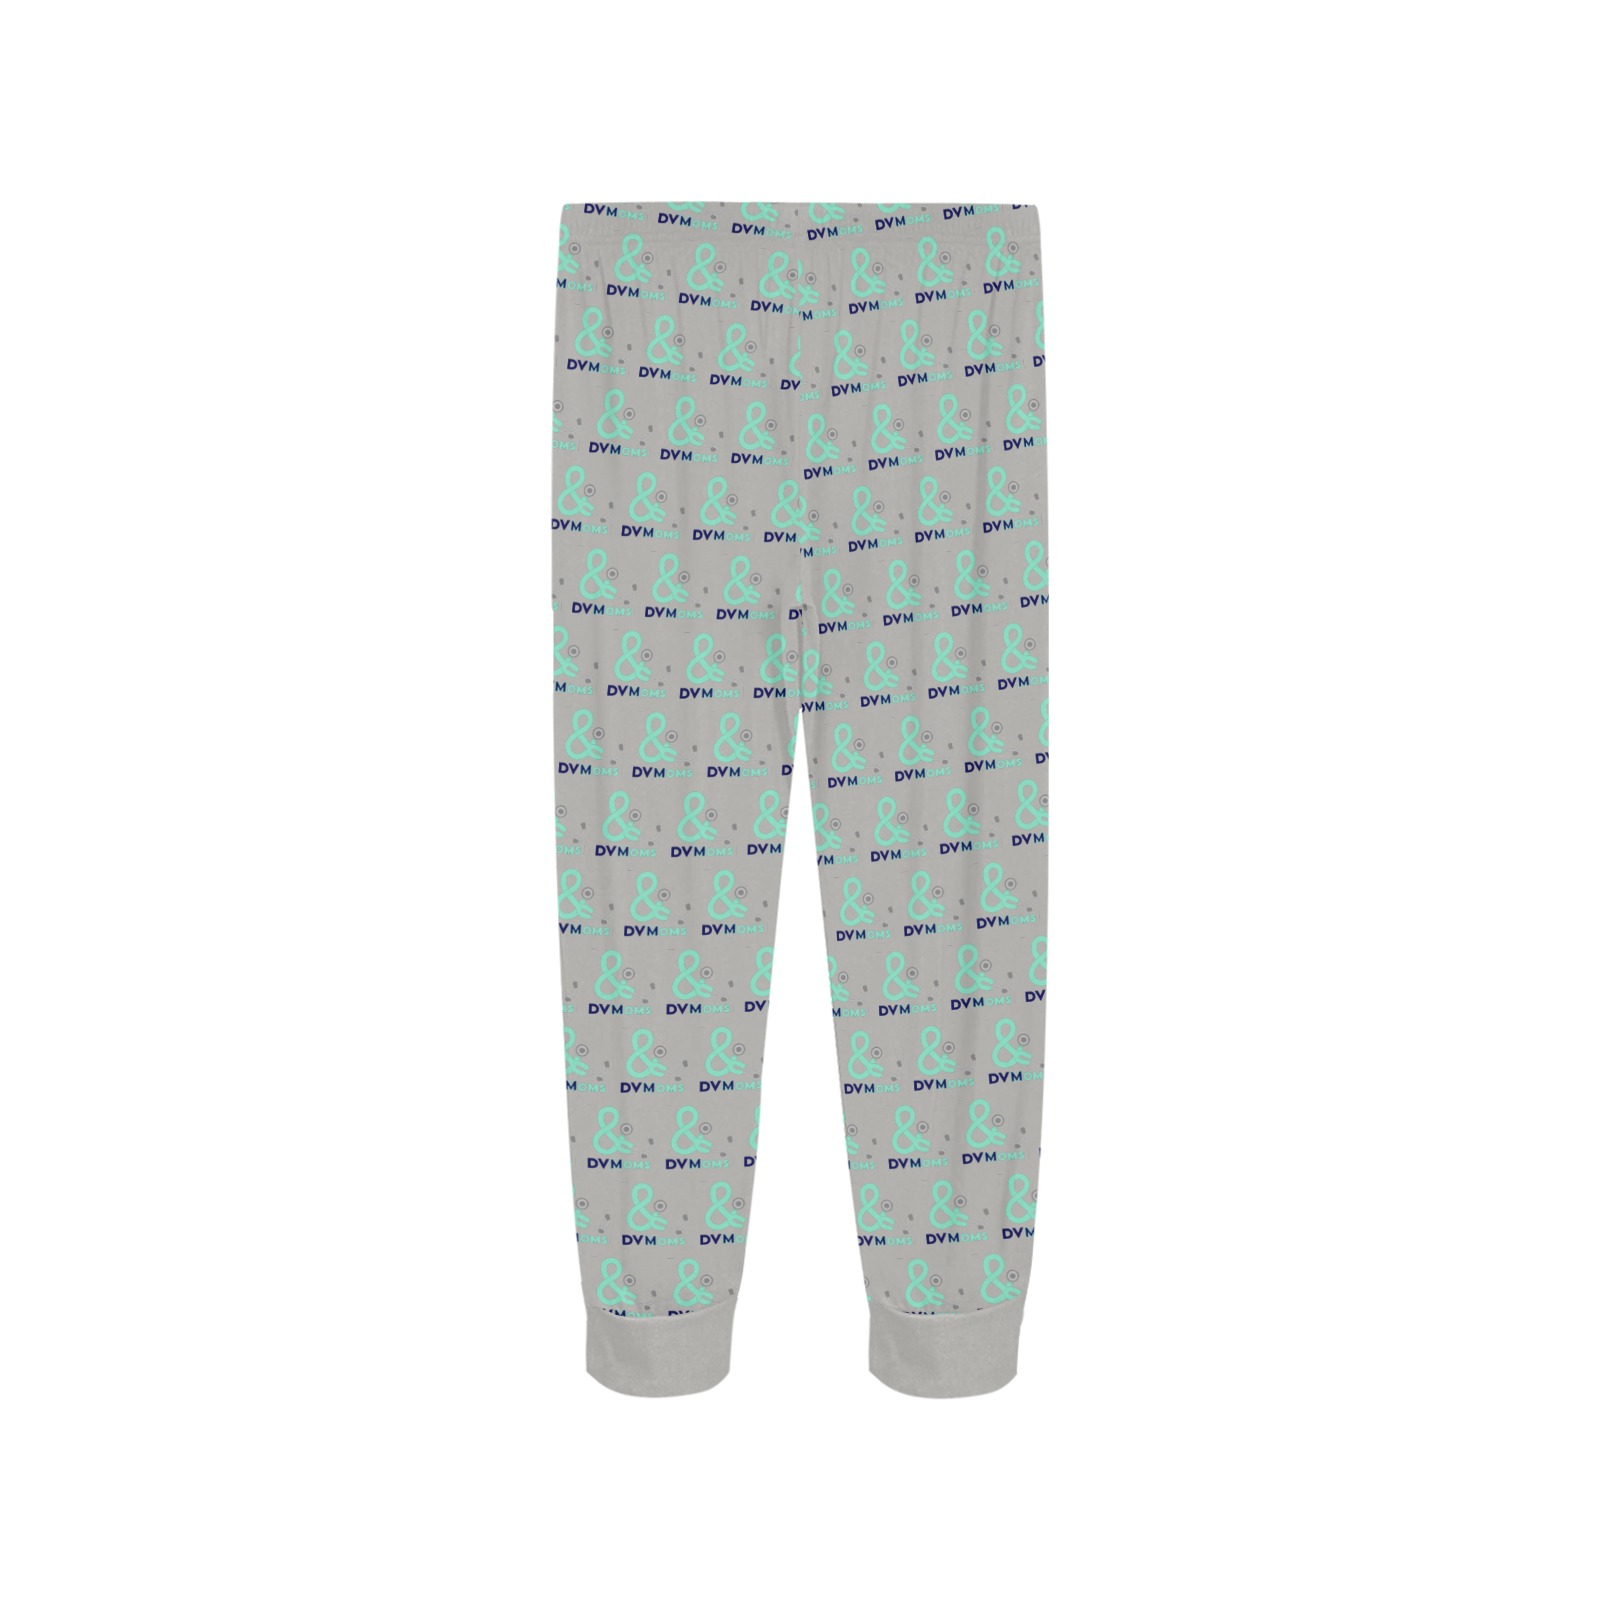 Gray pants all over logo Women's All Over Print Pajama Trousers